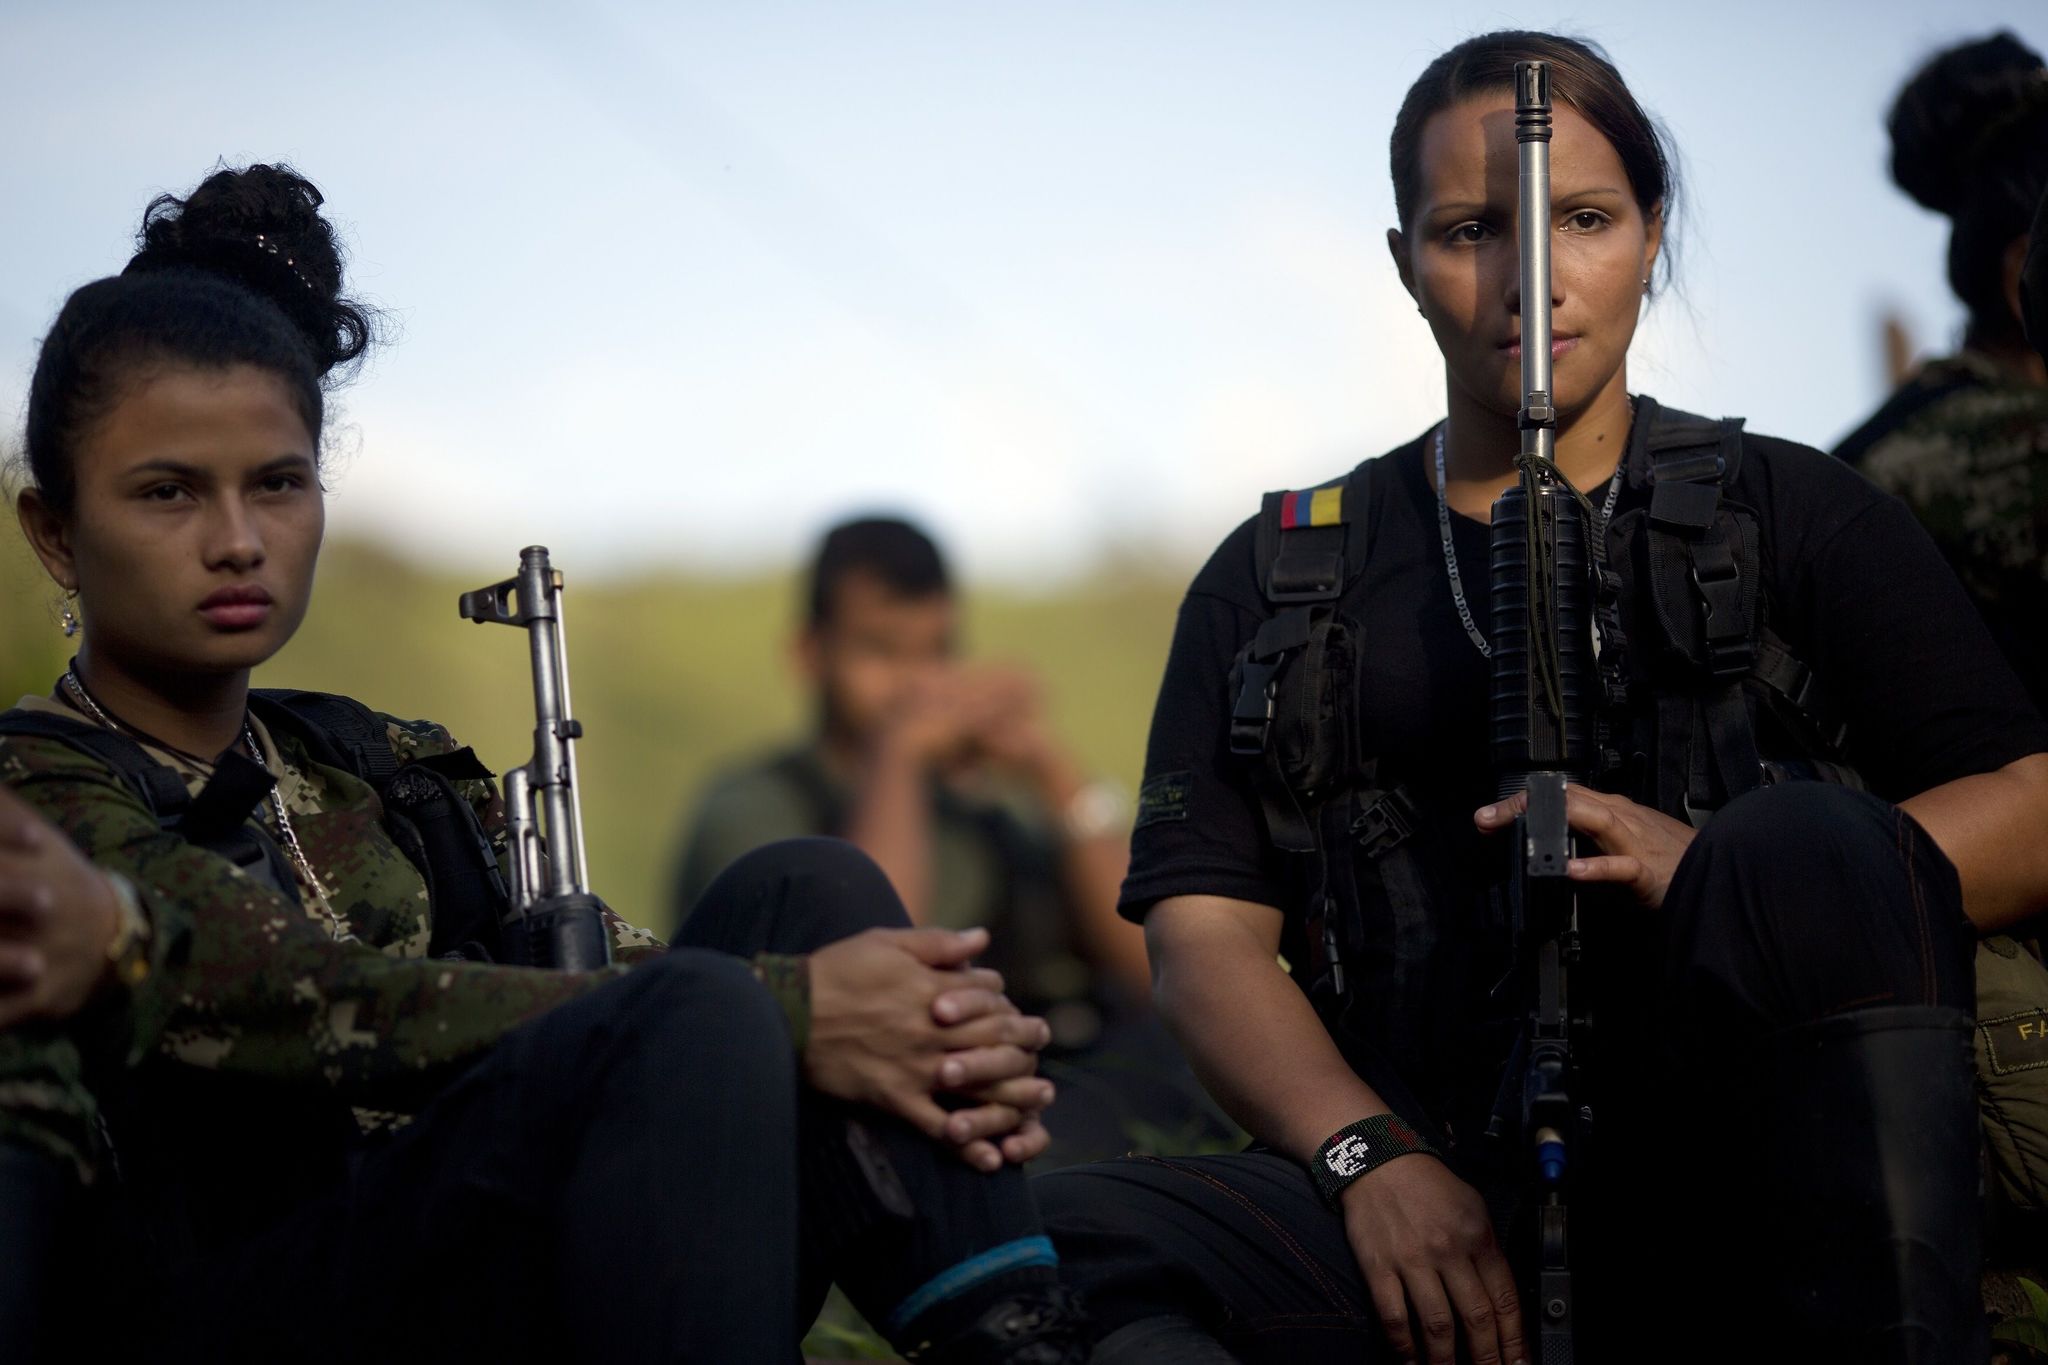 In this Jan. 4 photo, Juliana, 20, left, and Mariana, 24, rebel soldiers for the 36th Front of the Revolutionary Armed Forces of Colombia, or FARC, listen to a commander speak on the peace negotiations between the rebels and the Colombian government, in a hidden camp in Antioquia state, in the northwest Andes of Colombia. Colombian President Juan Manuel Santos said Tuesday that his government may reach an agreement on a bilateral ceasefire with leftist rebels as early as this week.